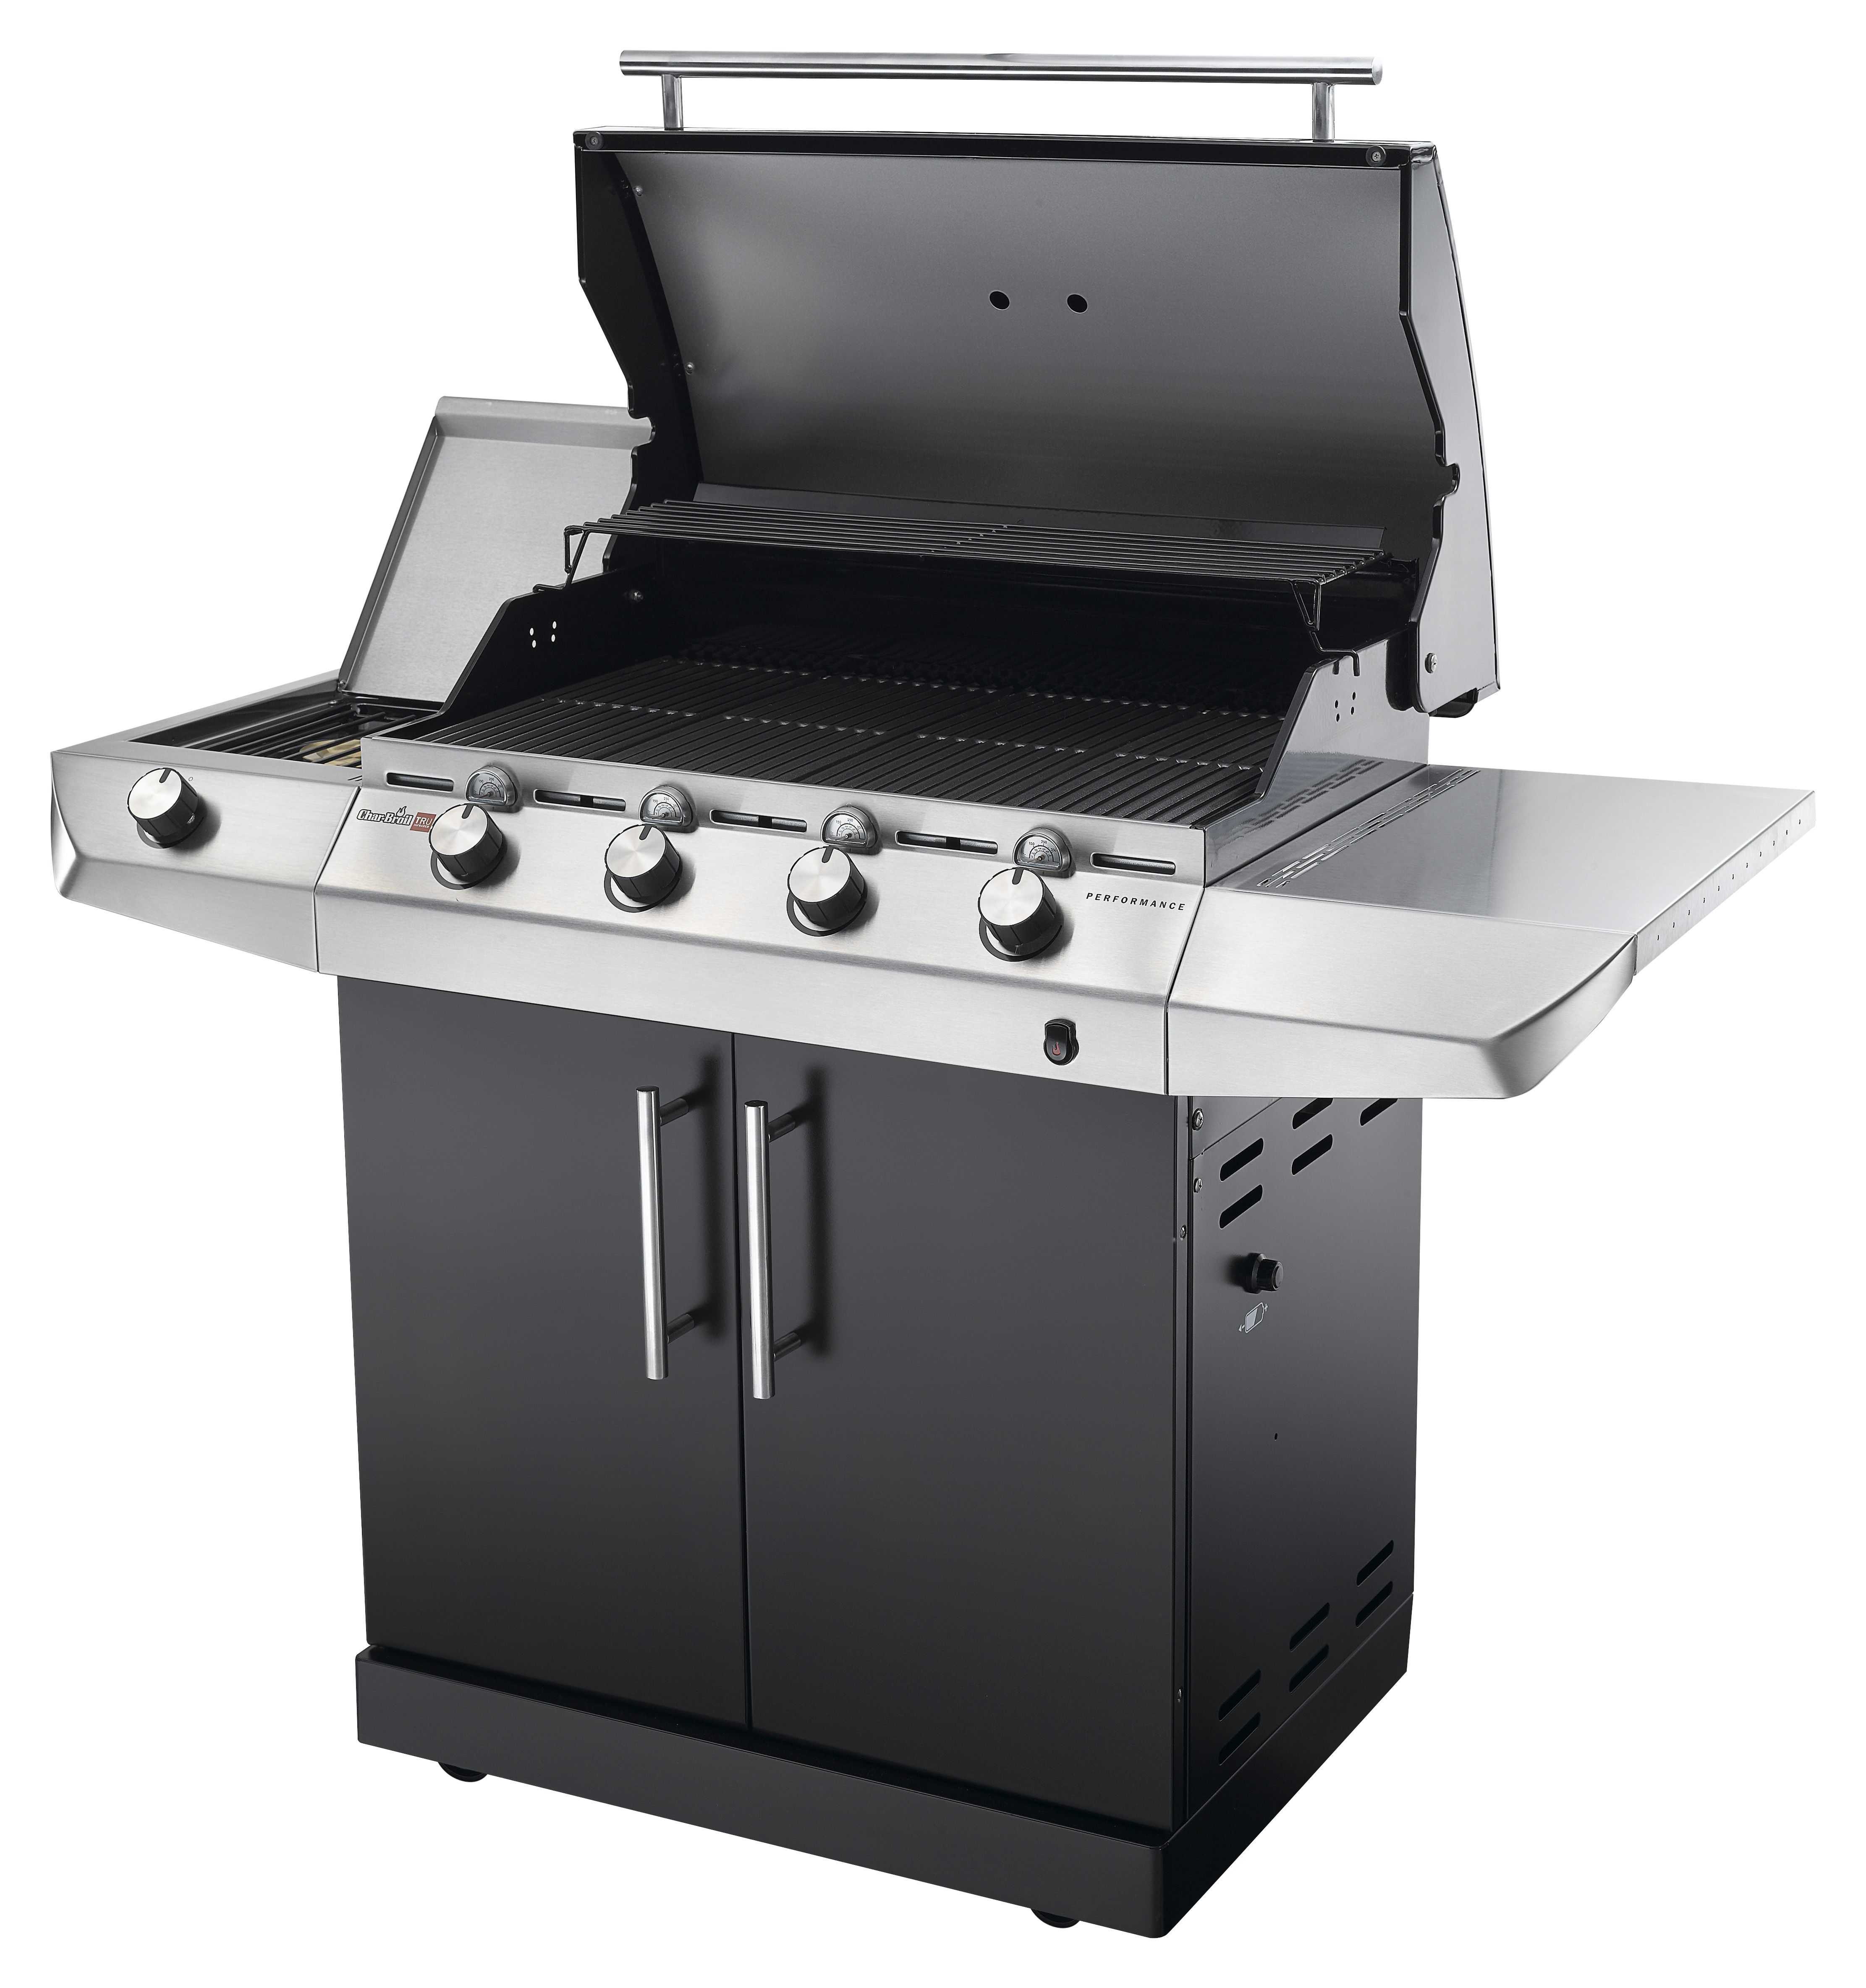 Charbroil Black Performance T-47G 4 burner Gas Barbecue